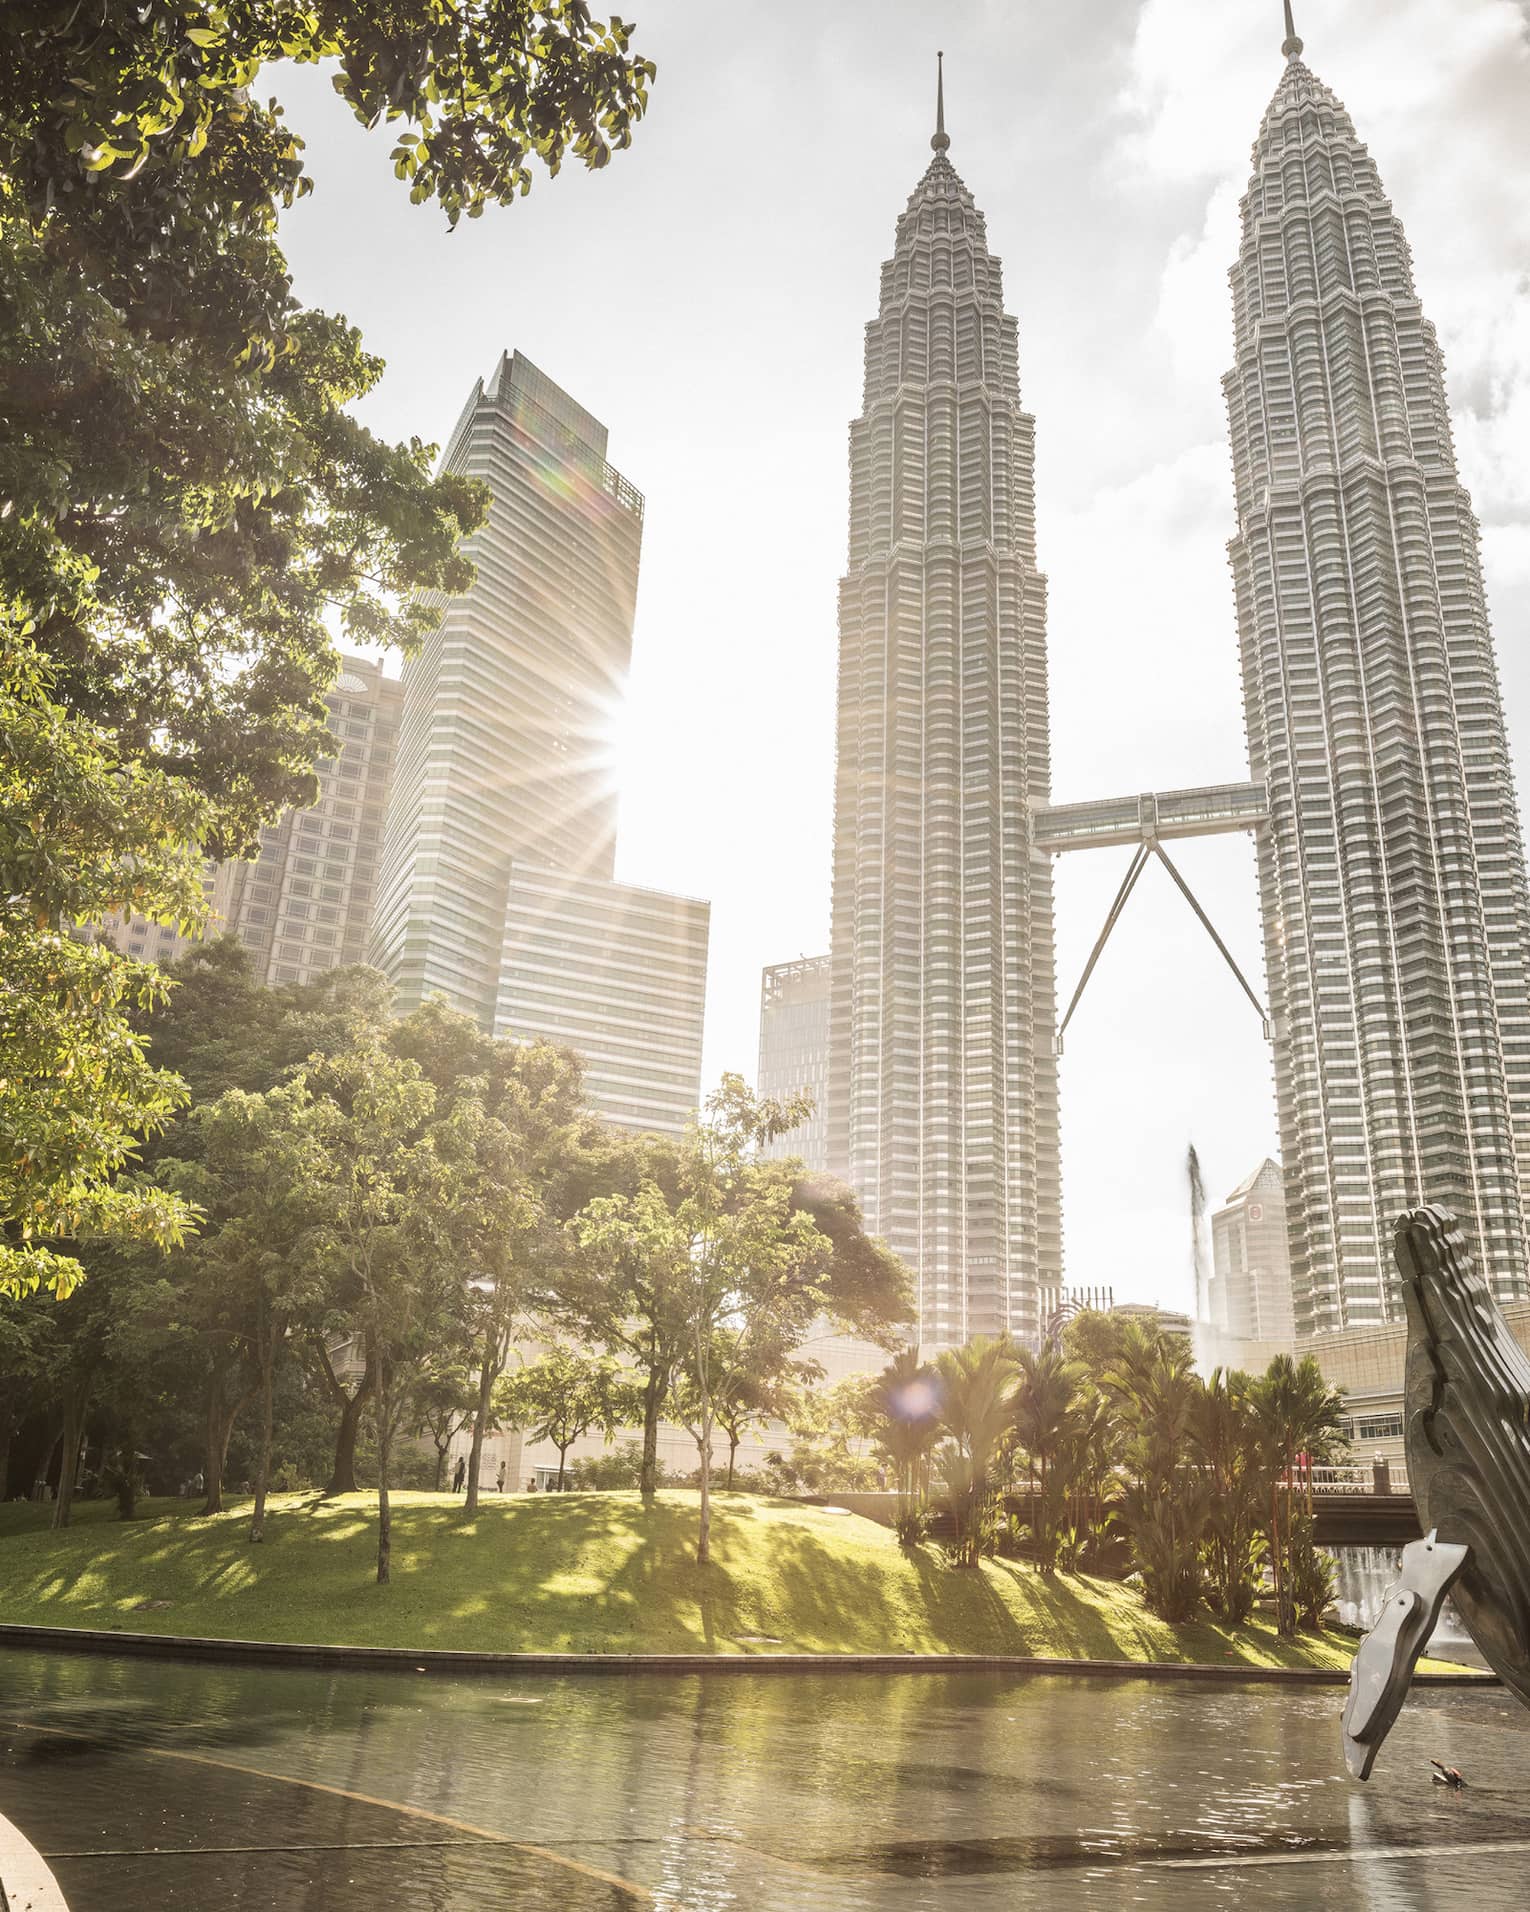 KLCC Park with a view of Four Seasons Hotel Kuala Lumpur